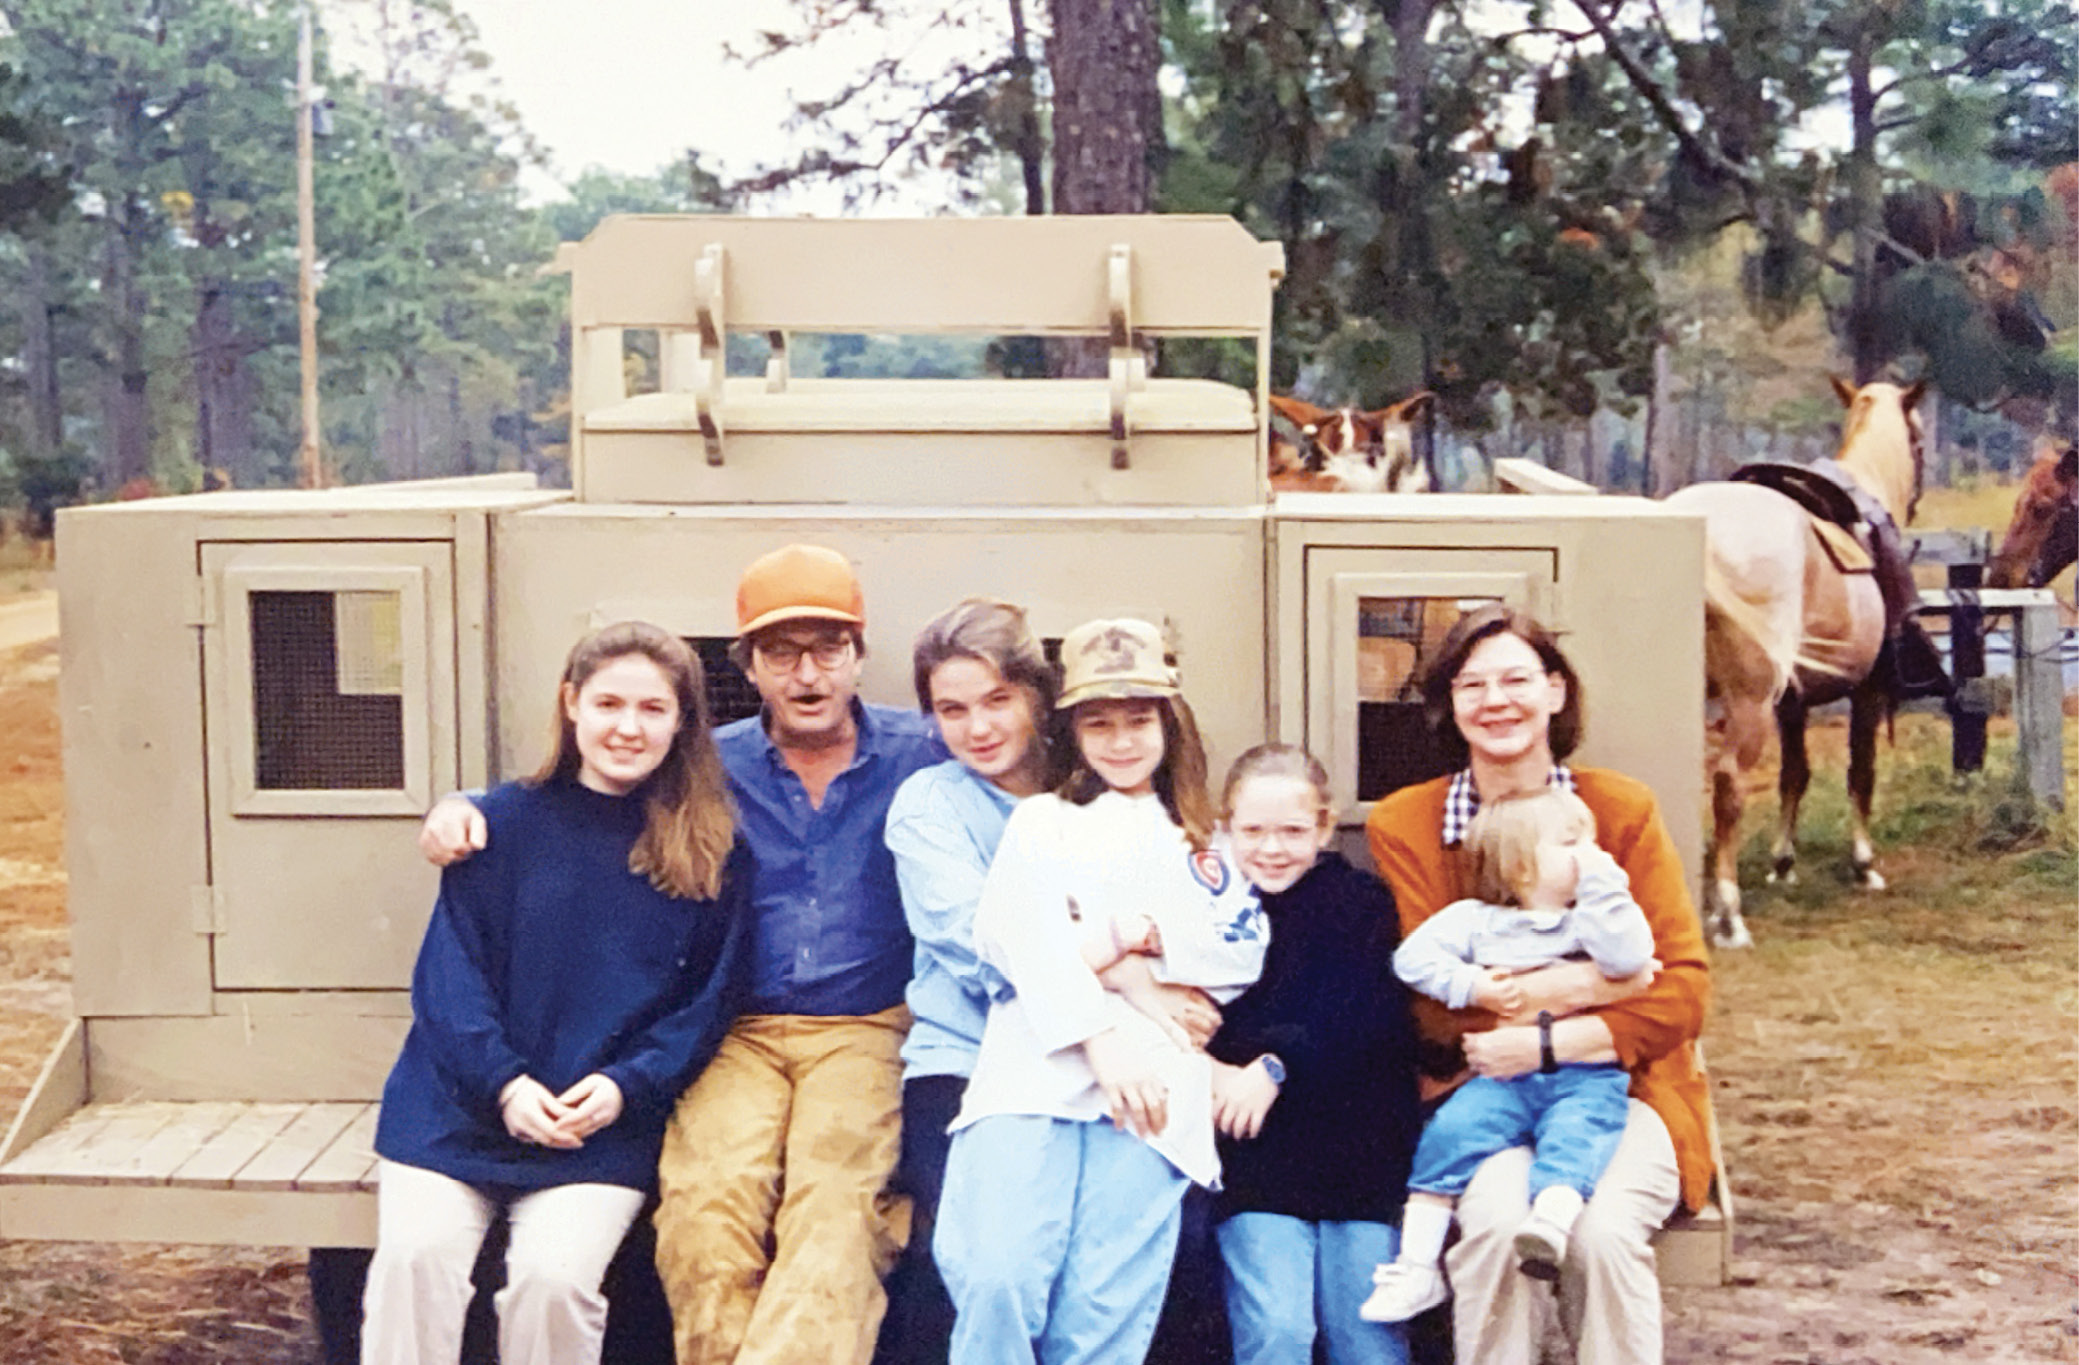 The Strachan Donnelley family on the Ashepoo mule wagon, circa 1989:  (from left) Naomi, dad Strachan, Inanna, Aidan, Ceara, mom Vivian, and Tegan.